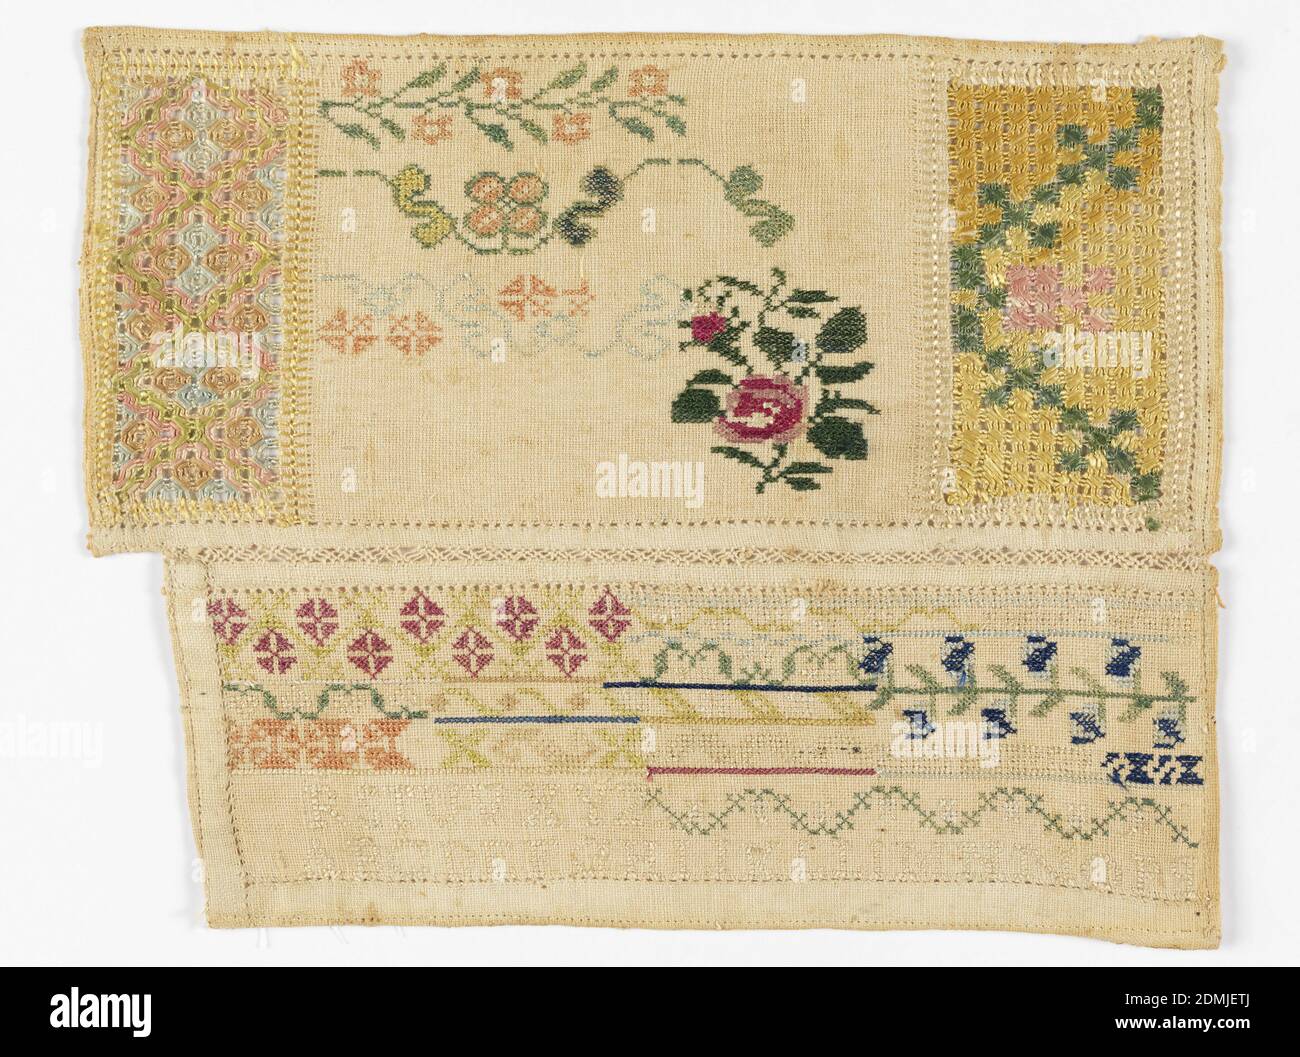 Sampler, Medium: silk on cotton Technique: cross, aztec (surface satin over  withdrawn element work) and long armed cross stitch on plain weave  foundation; counted stitches, Two separate pieces of cloth containing floral